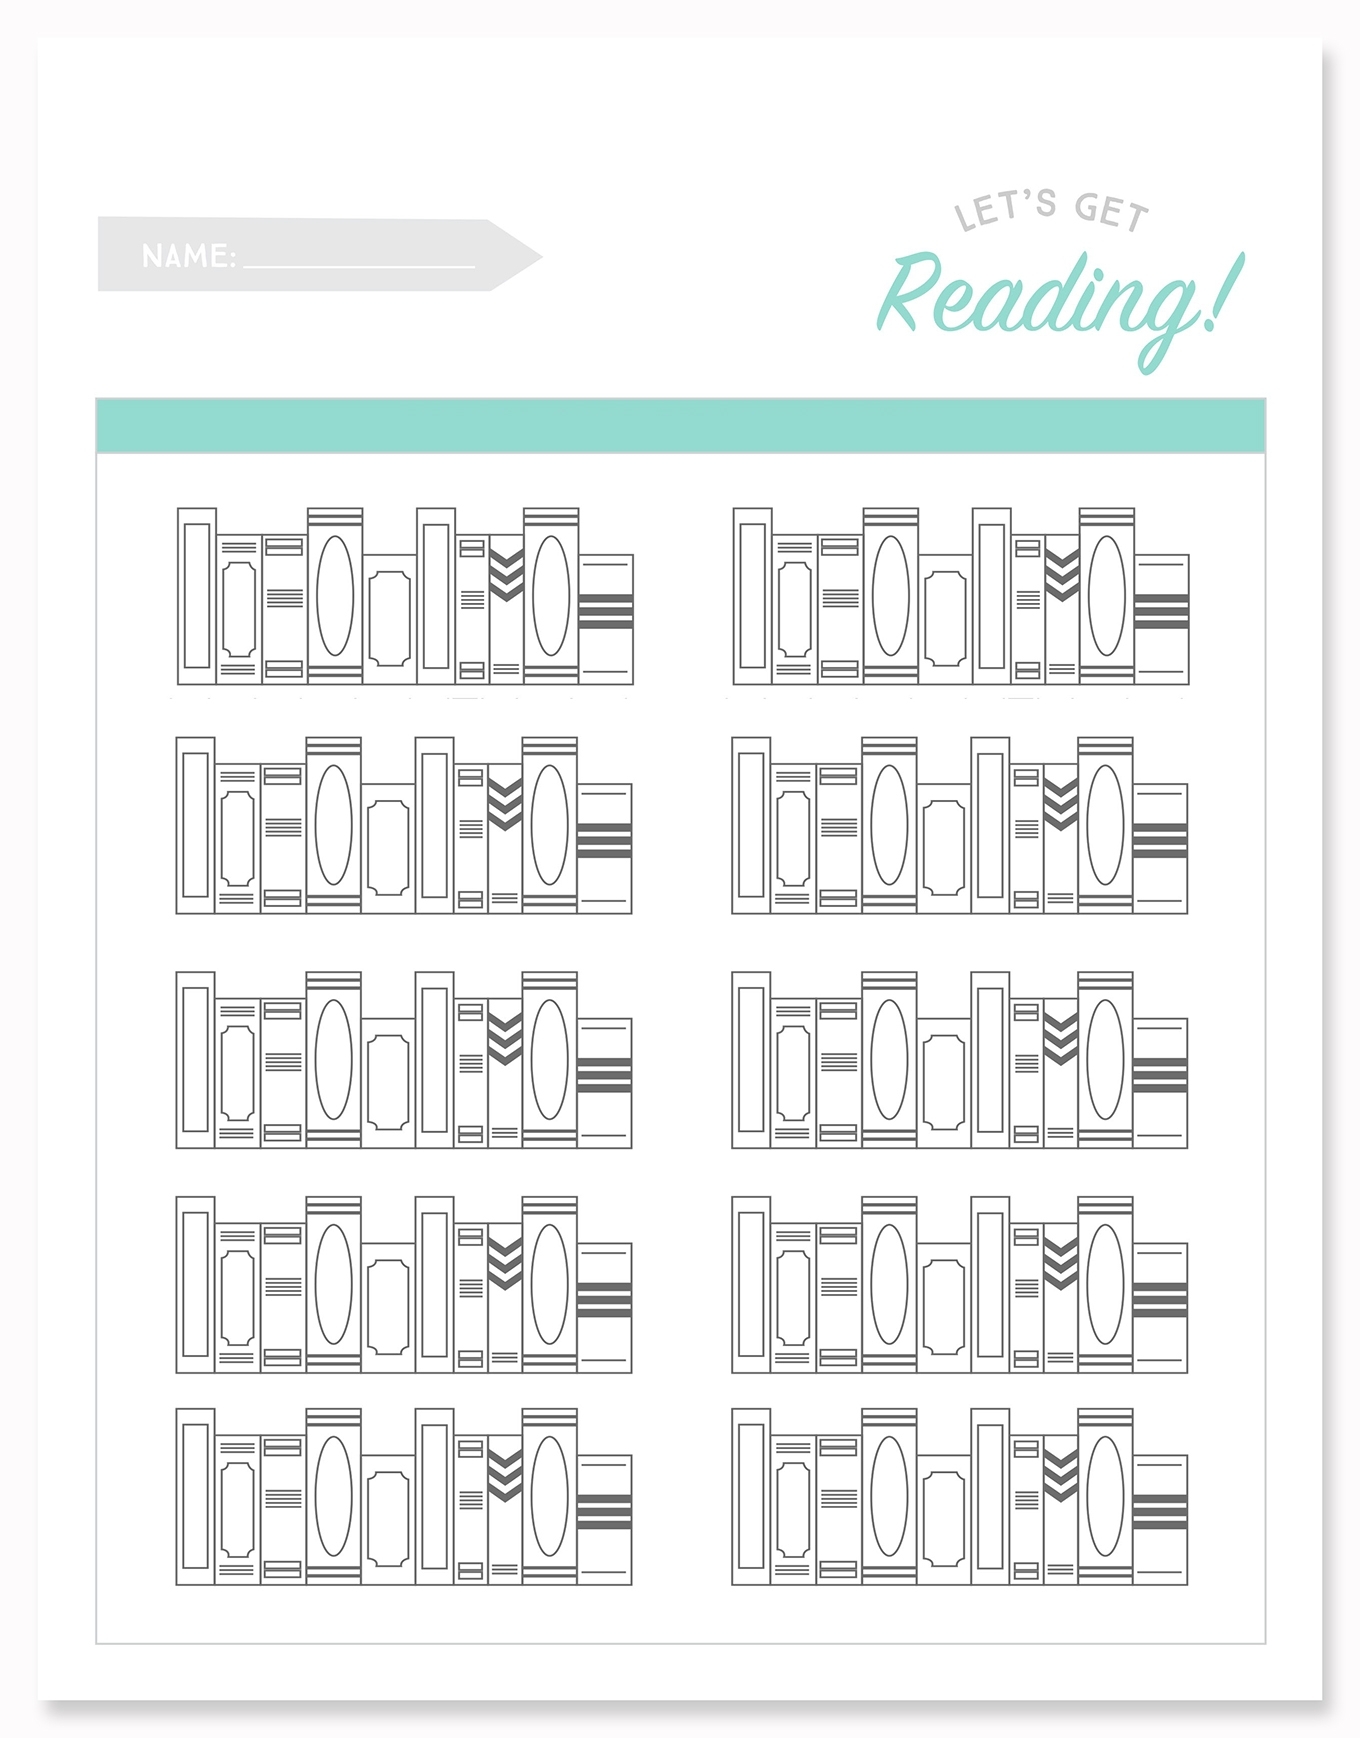 Printable Reading Log For Kids - Simple As That